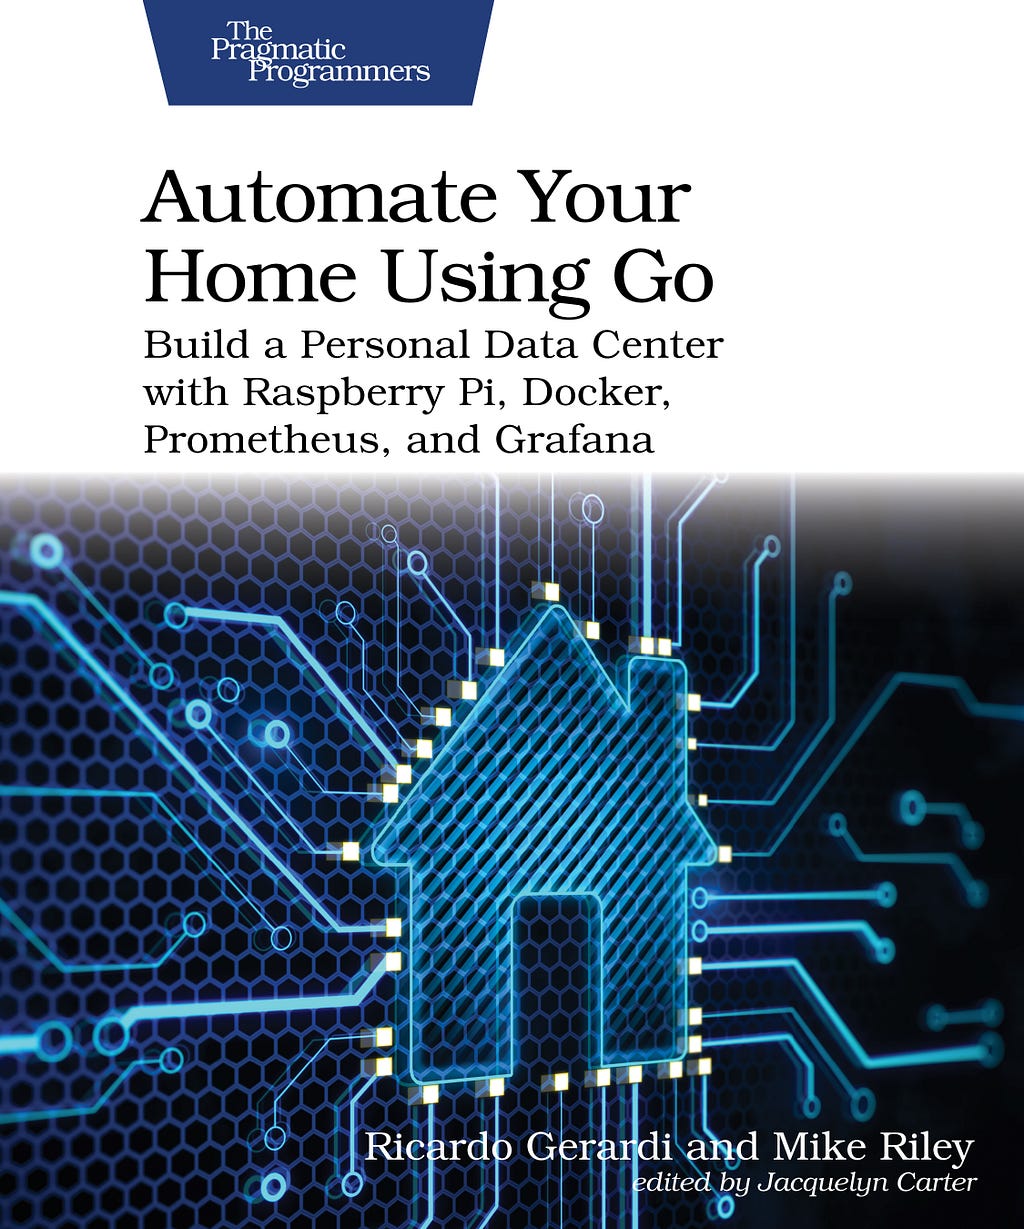 Book cover featuring a digital-looking house in blue